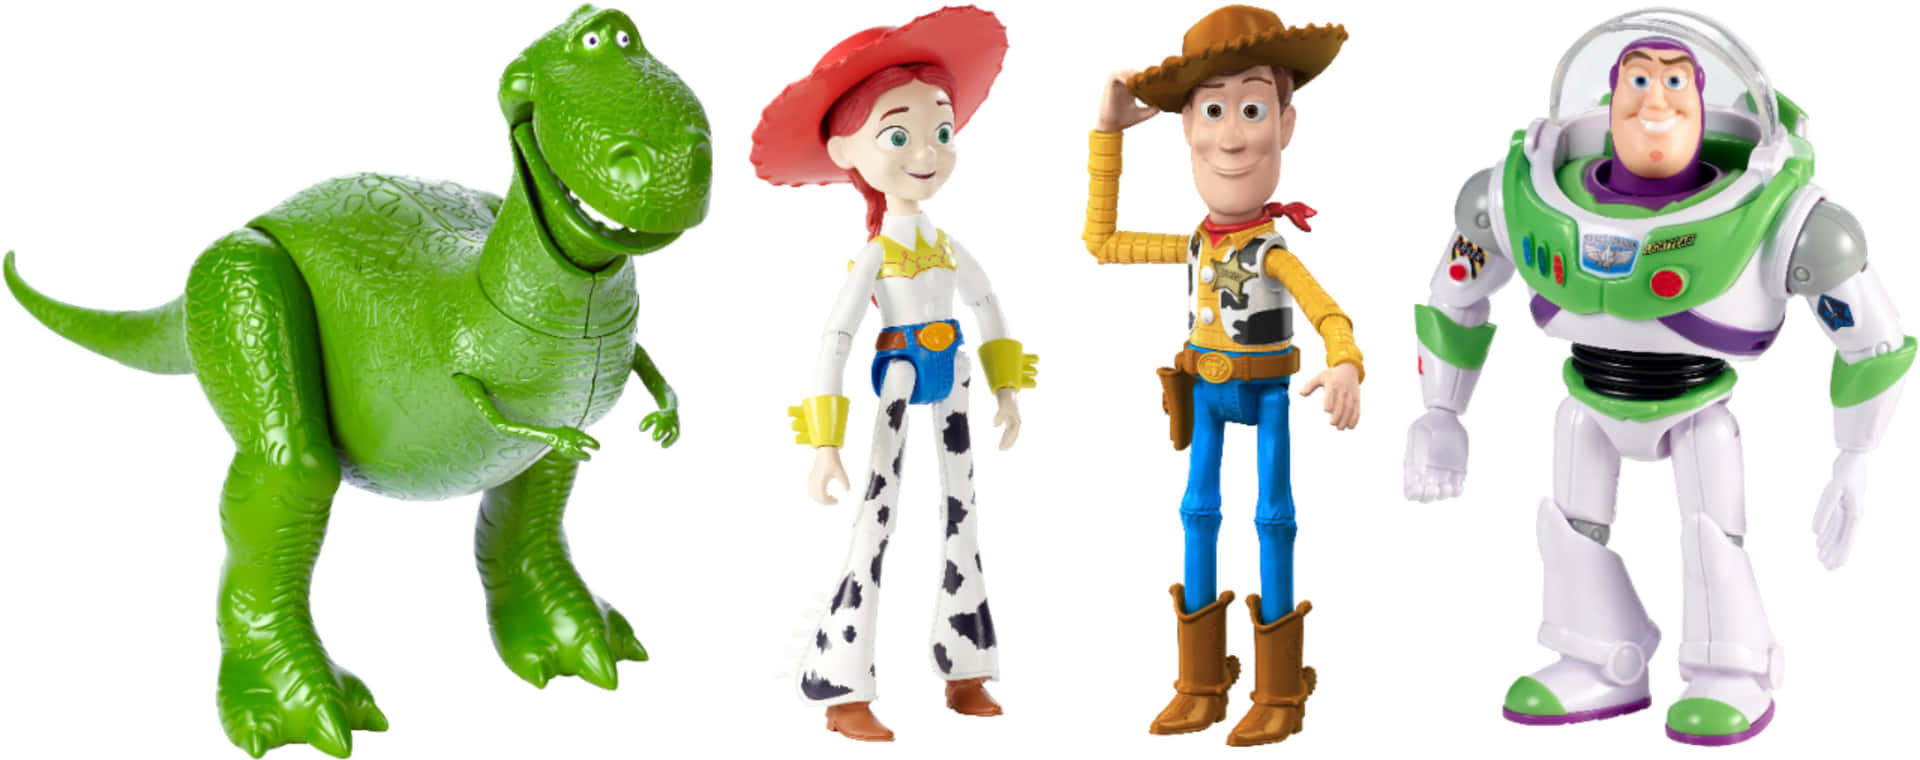 Woody, Buzz and Bo Peep reunited in the world of Toy Story 4